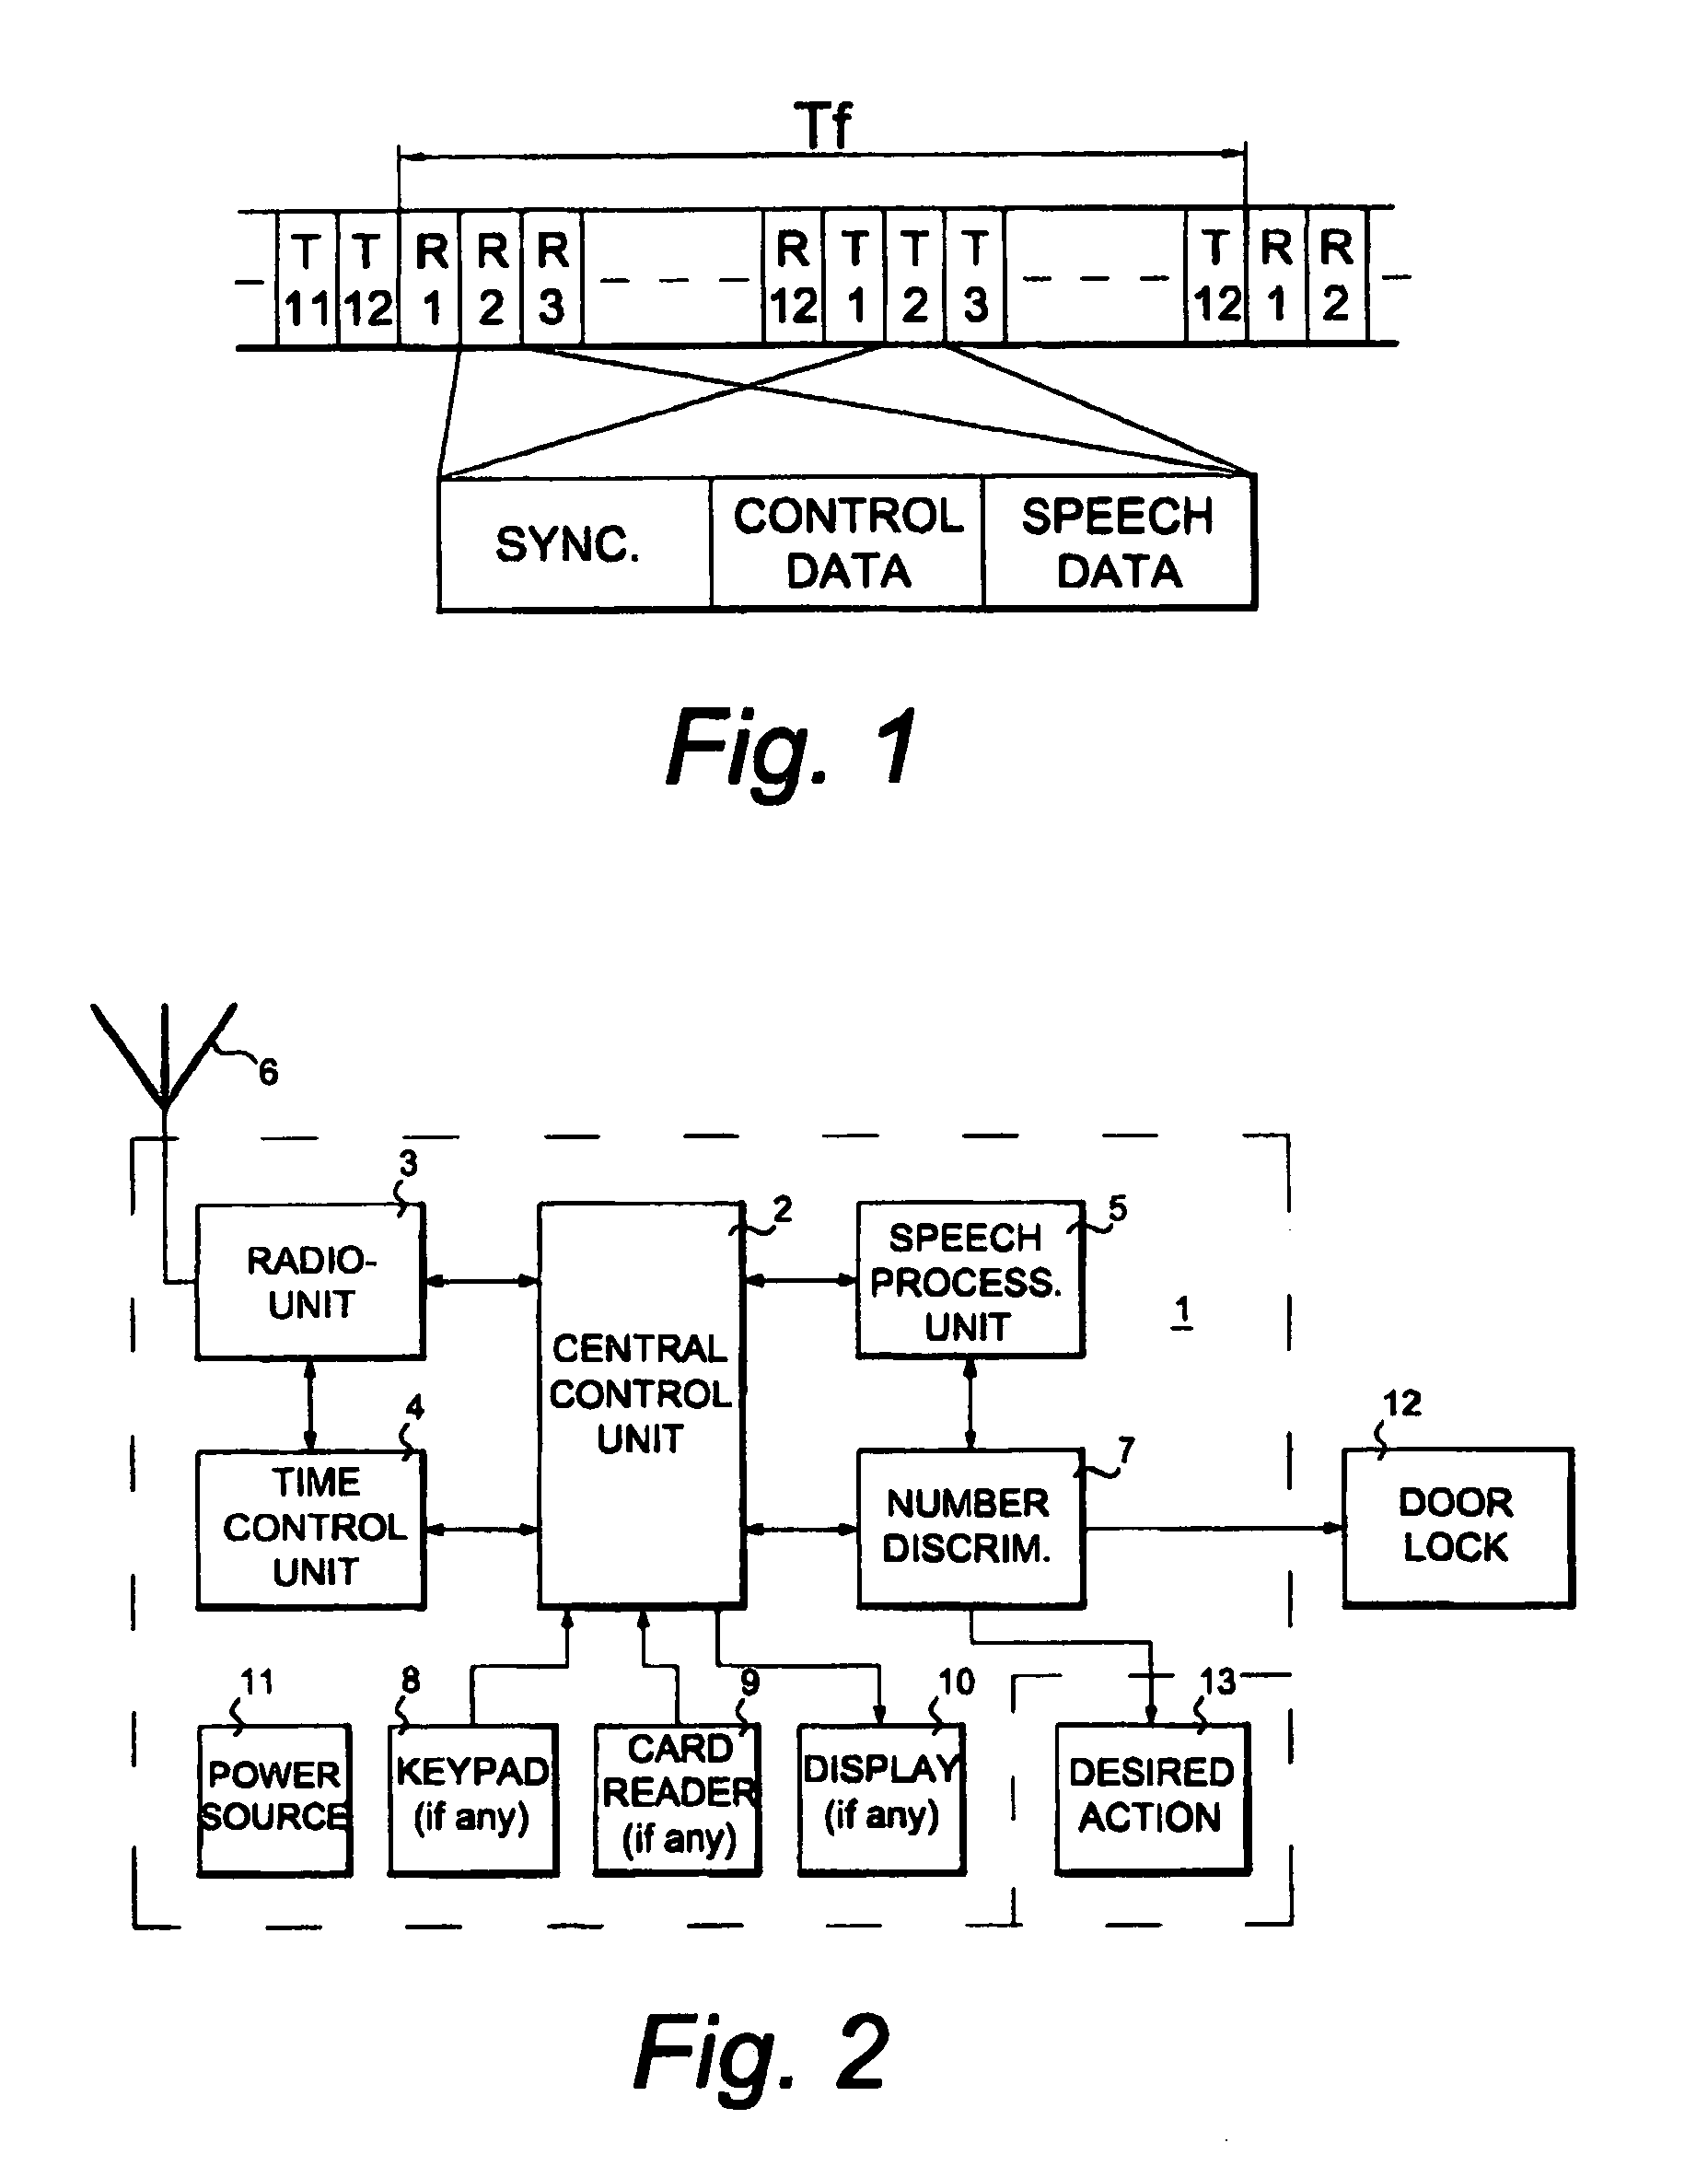 Method and device for utilization of mobile radio telephones for surveillance and/or control purposes